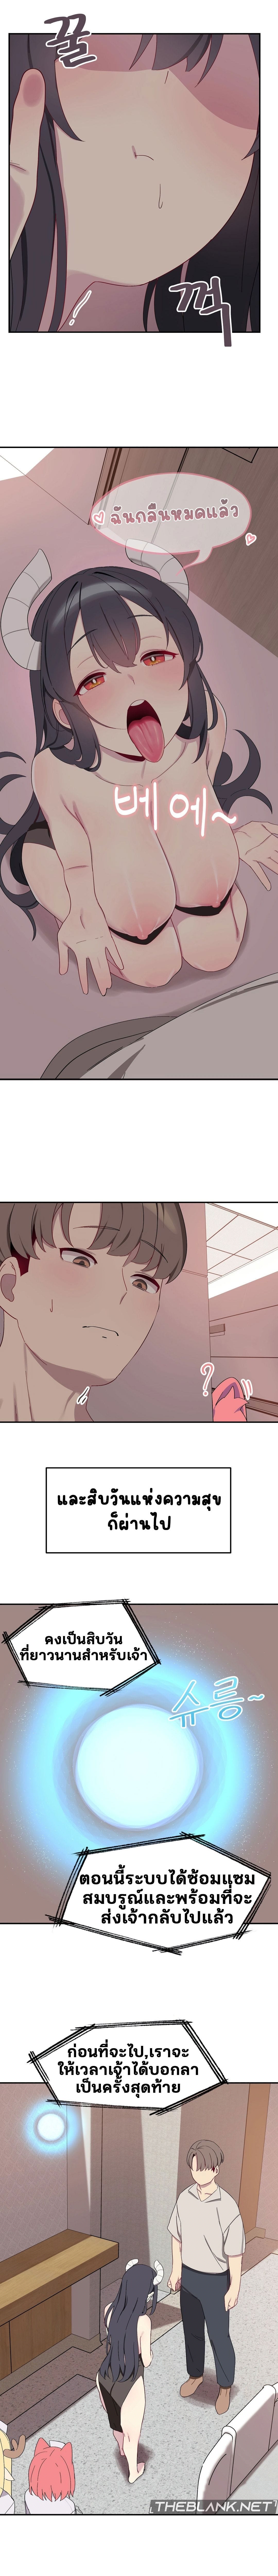 Hospitalized Life in Another World ตอนที่ 5 ภาพ 13